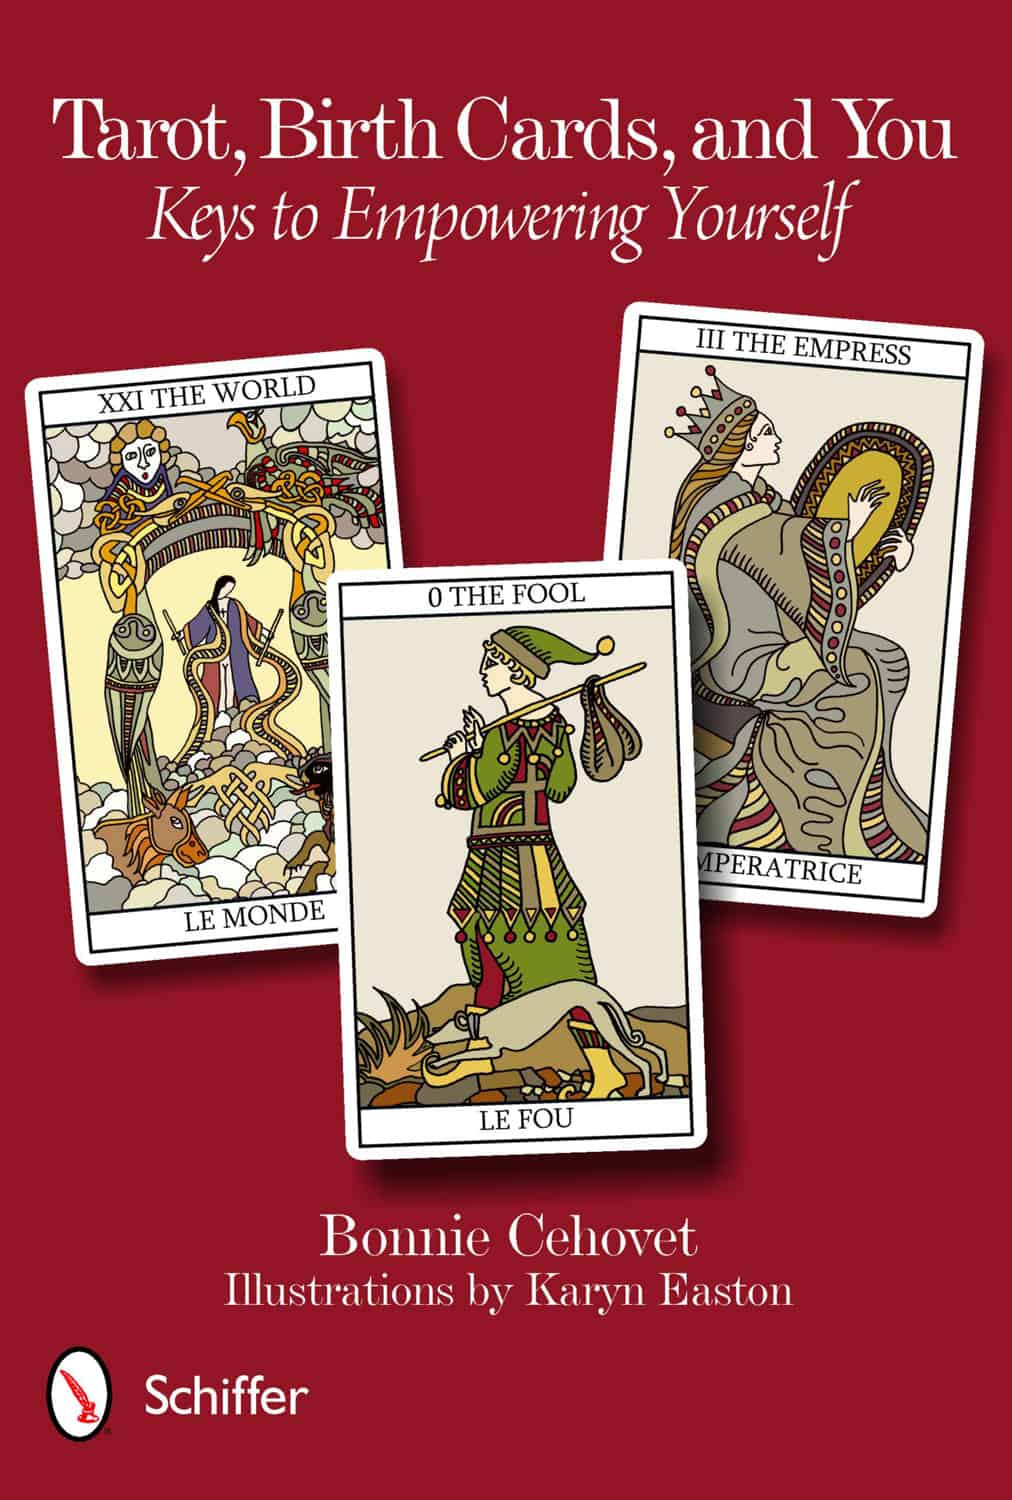 The Deck and Book Nook – Tarot, Birth Cards, and You